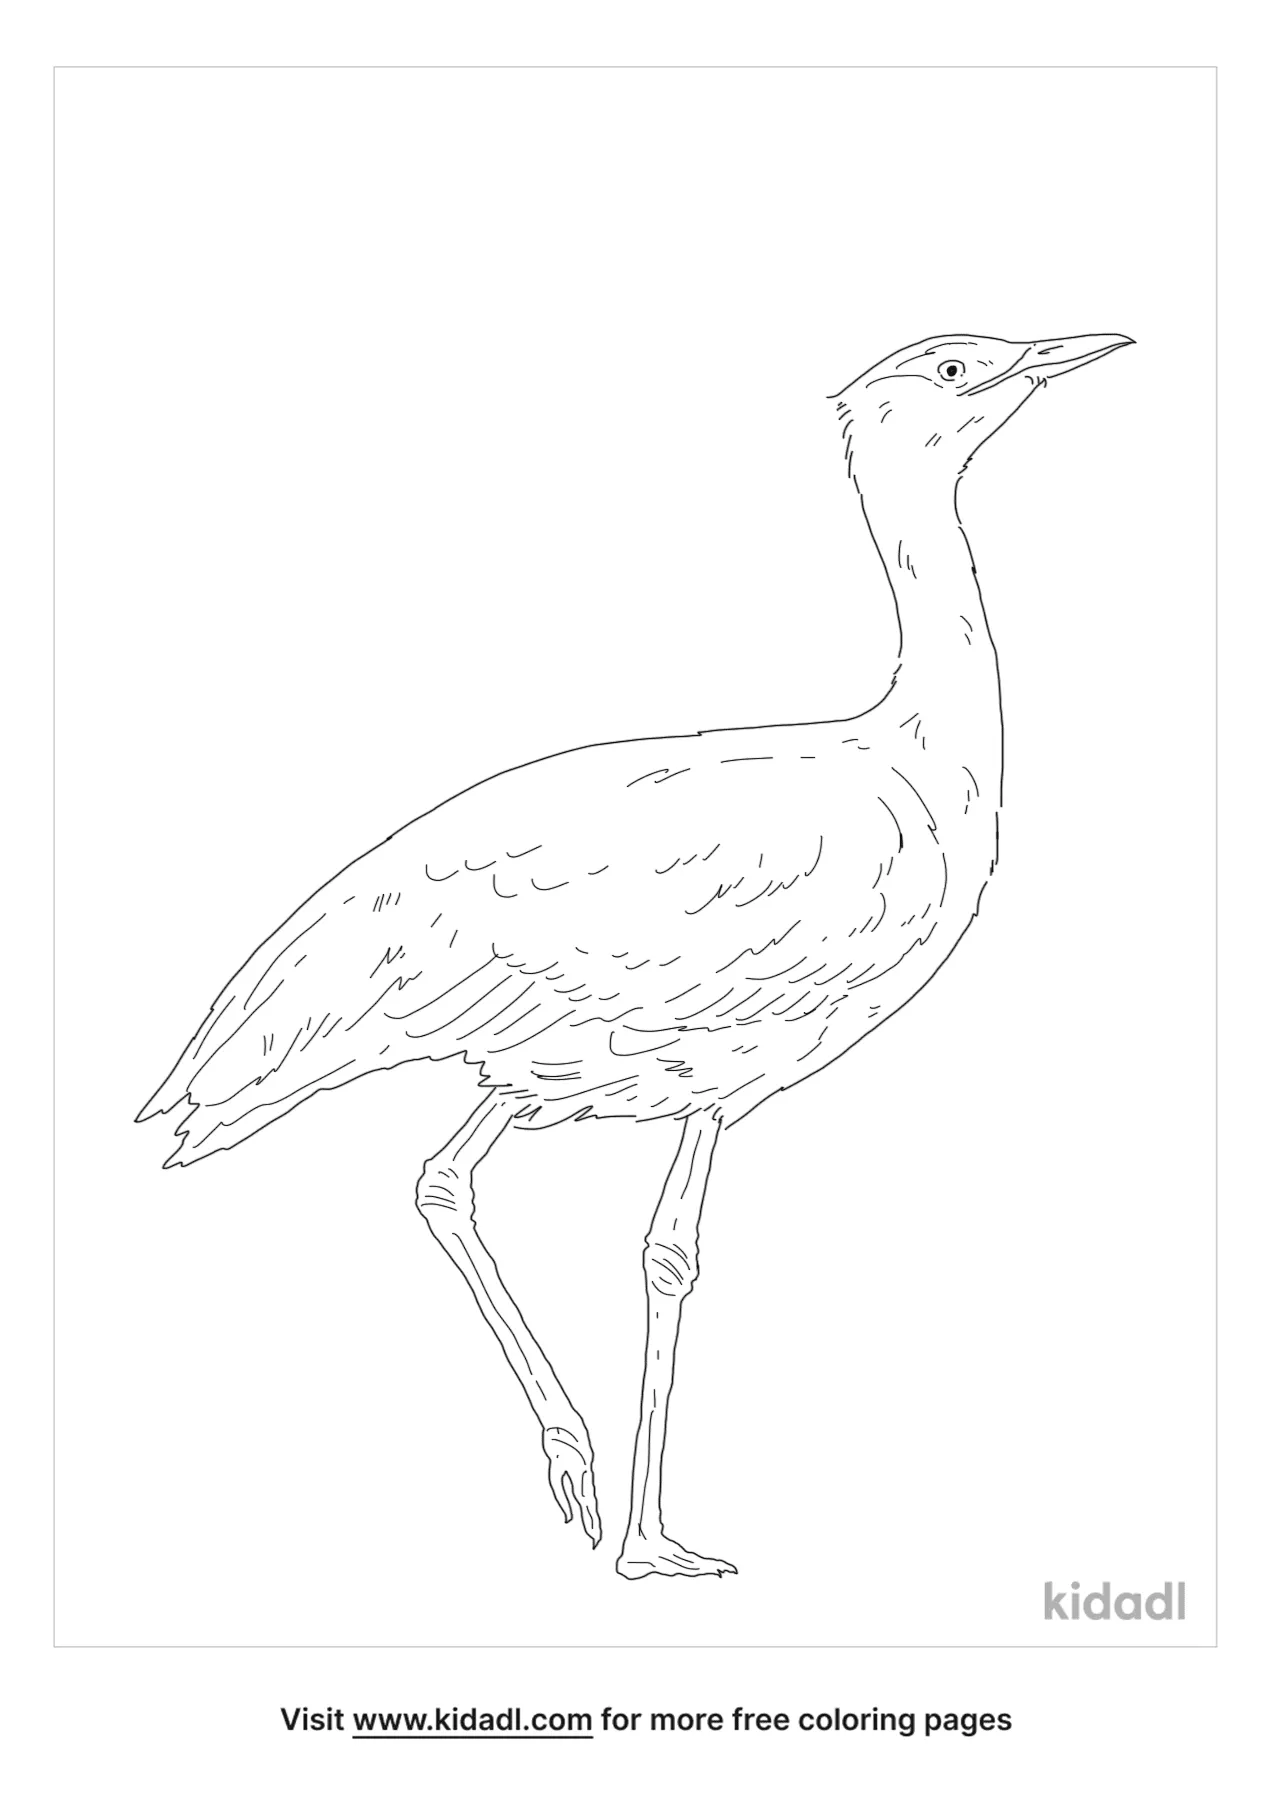 Australian Bustard Coloring Page